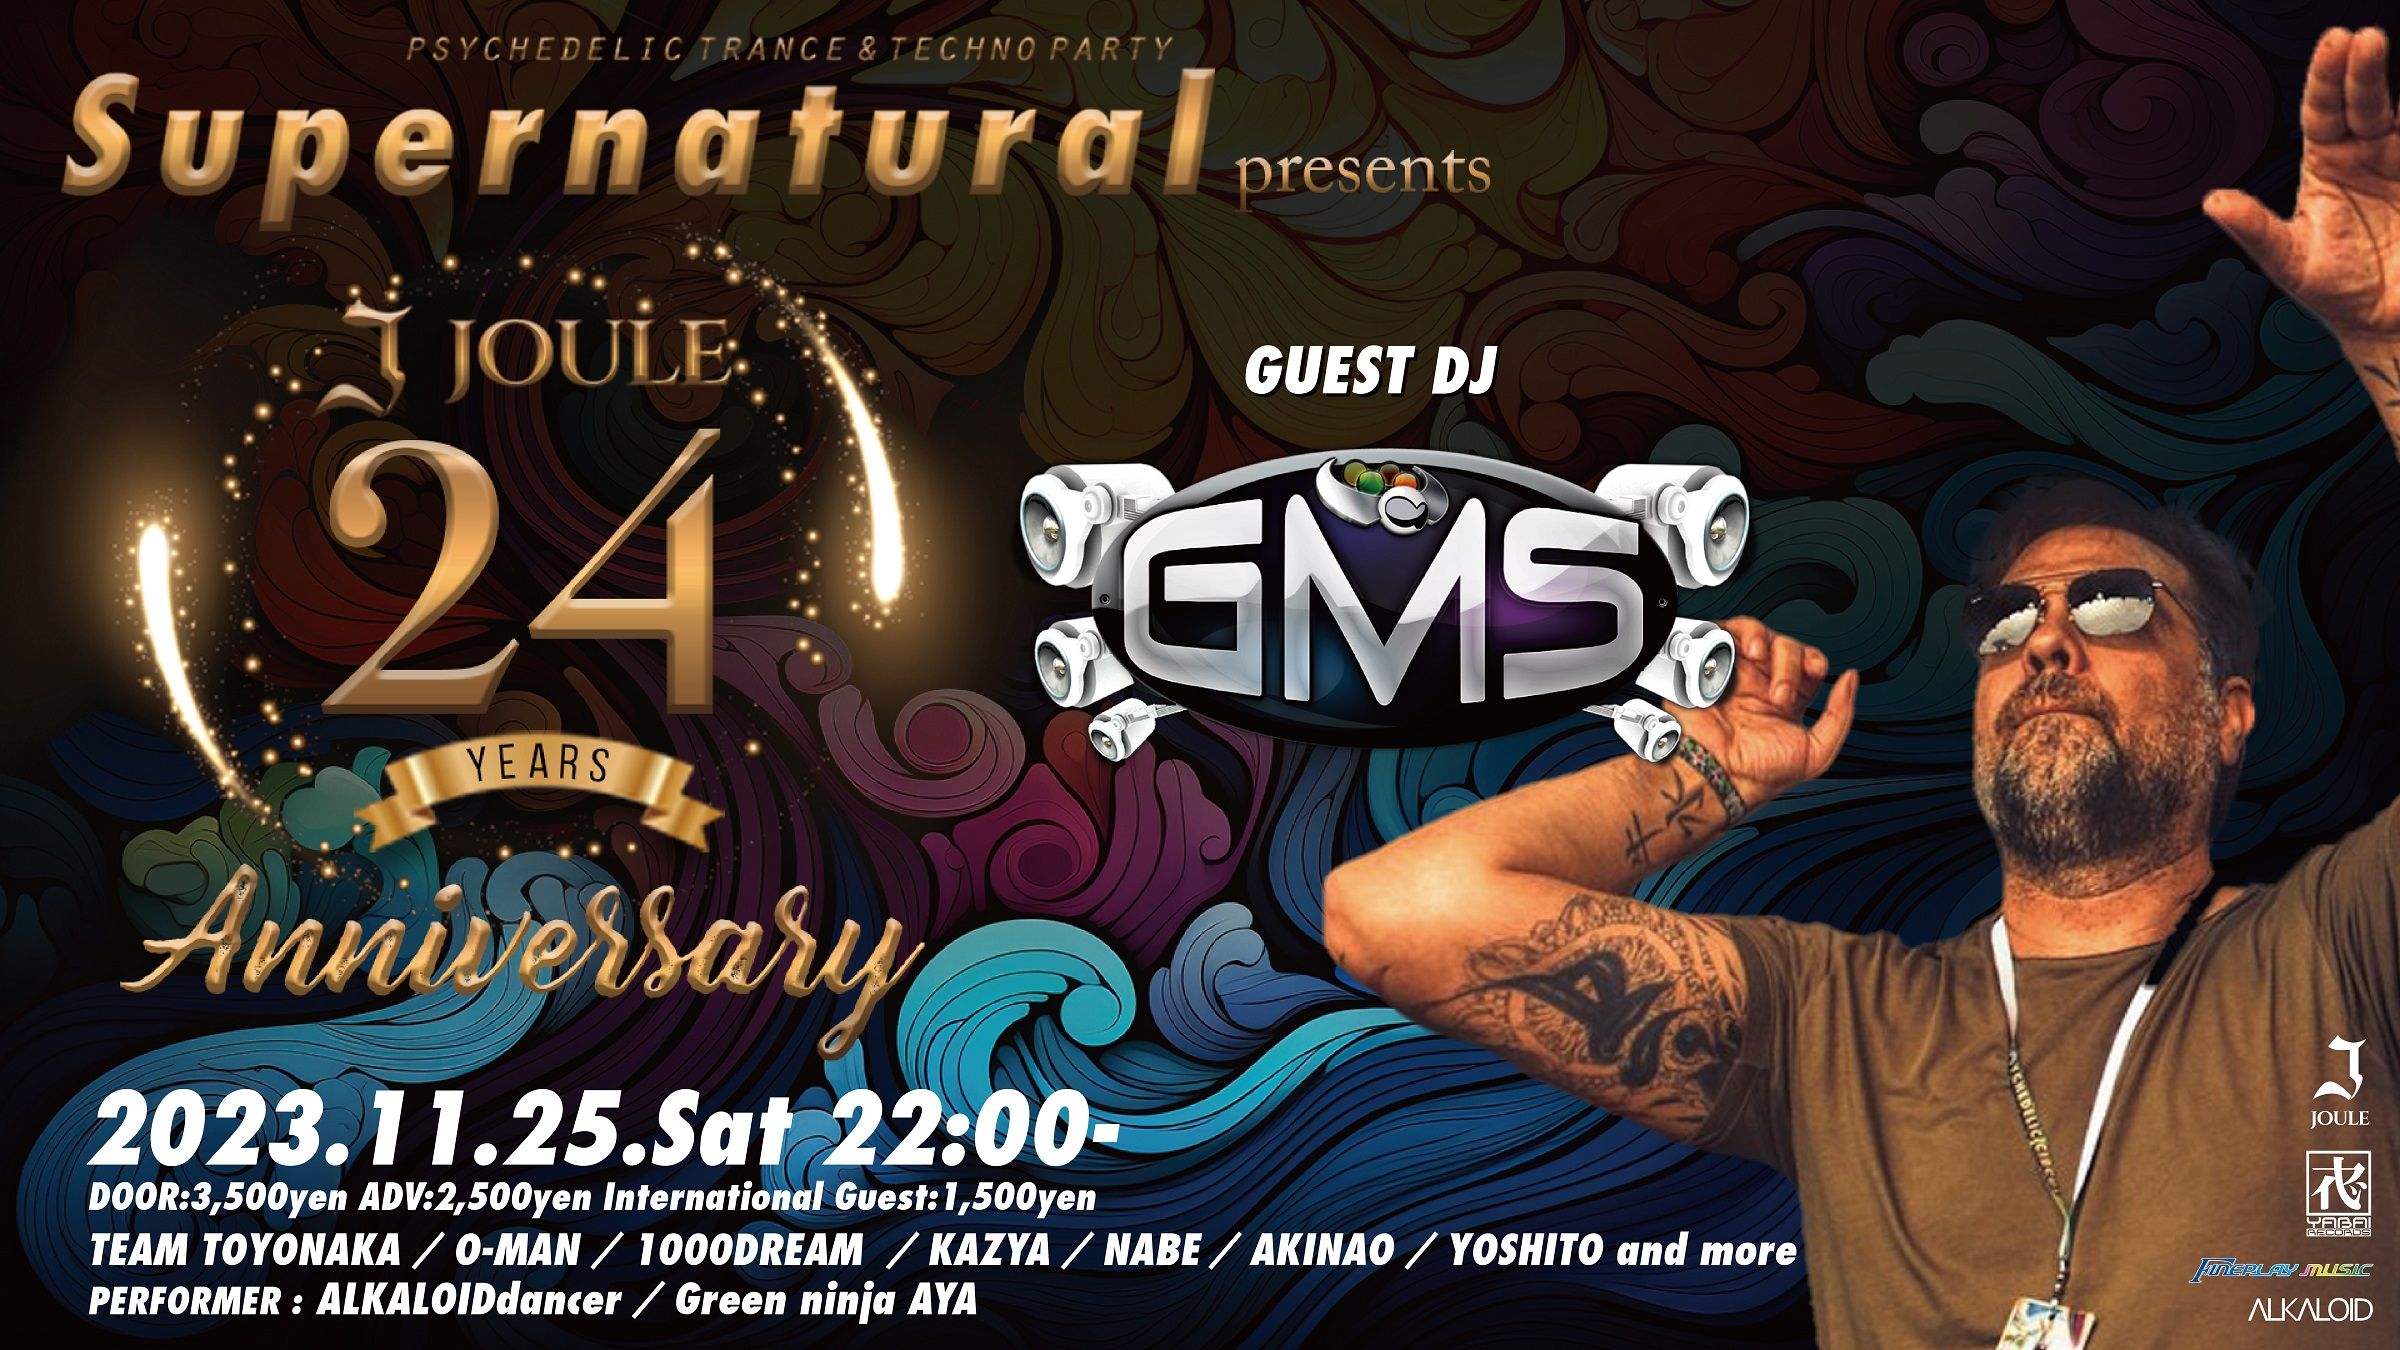 Supernatural presents clubJOULE 24th ANNIVERSARY